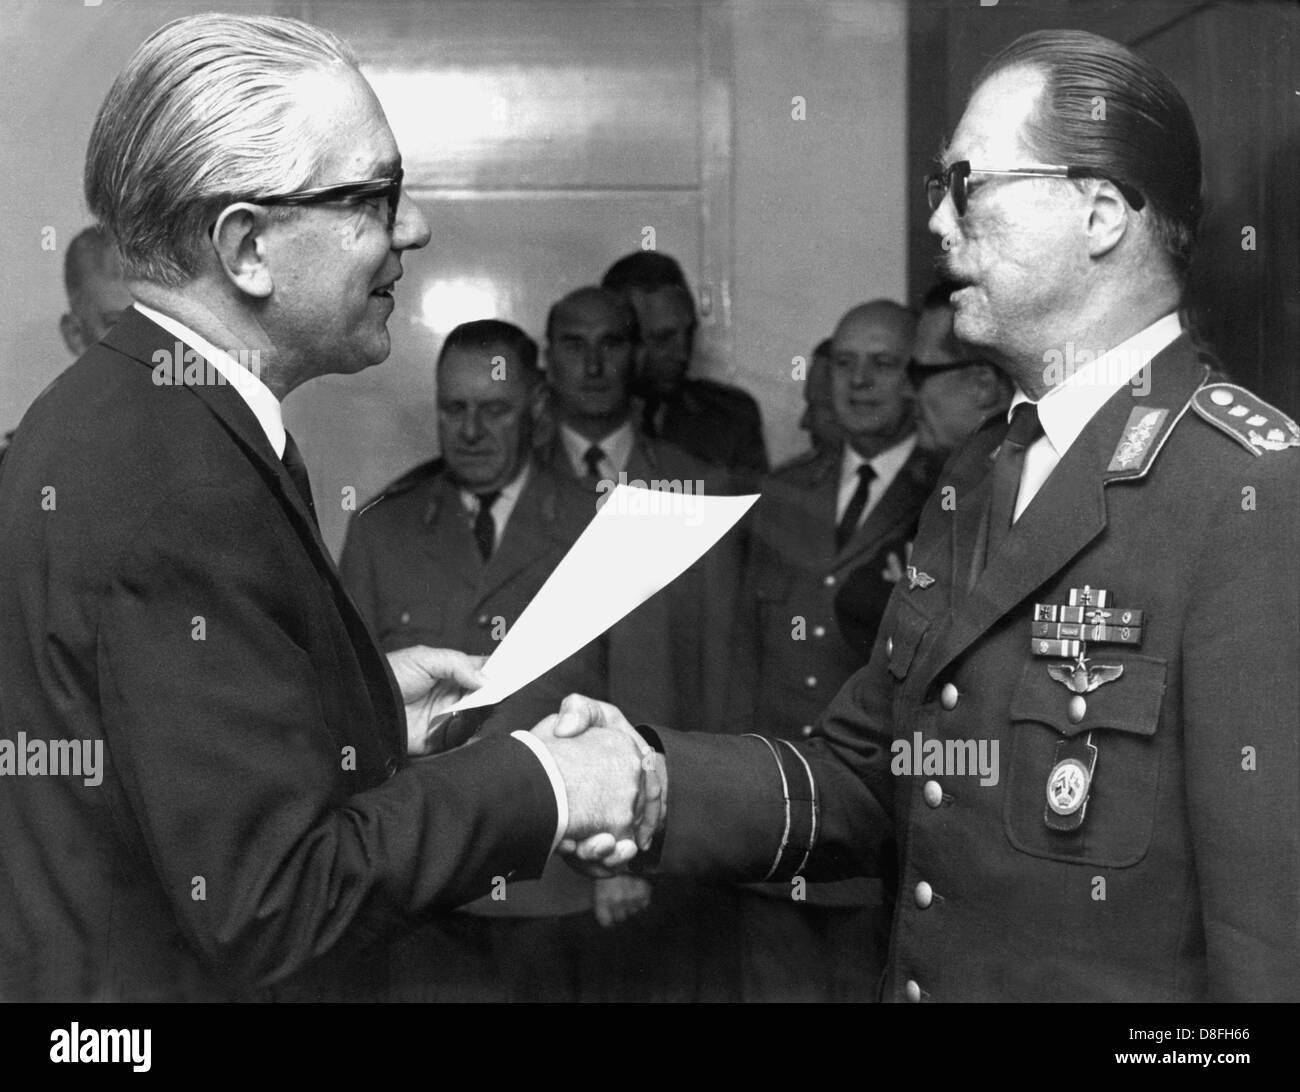 Federal defence minister Kai-Uwe von Hassel (l) hands over the letter of appointment to General Johannes Steinhoff, the new Chief of Staff of the German air force on the 2nd of September in 1966 in Bonn. Stock Photo